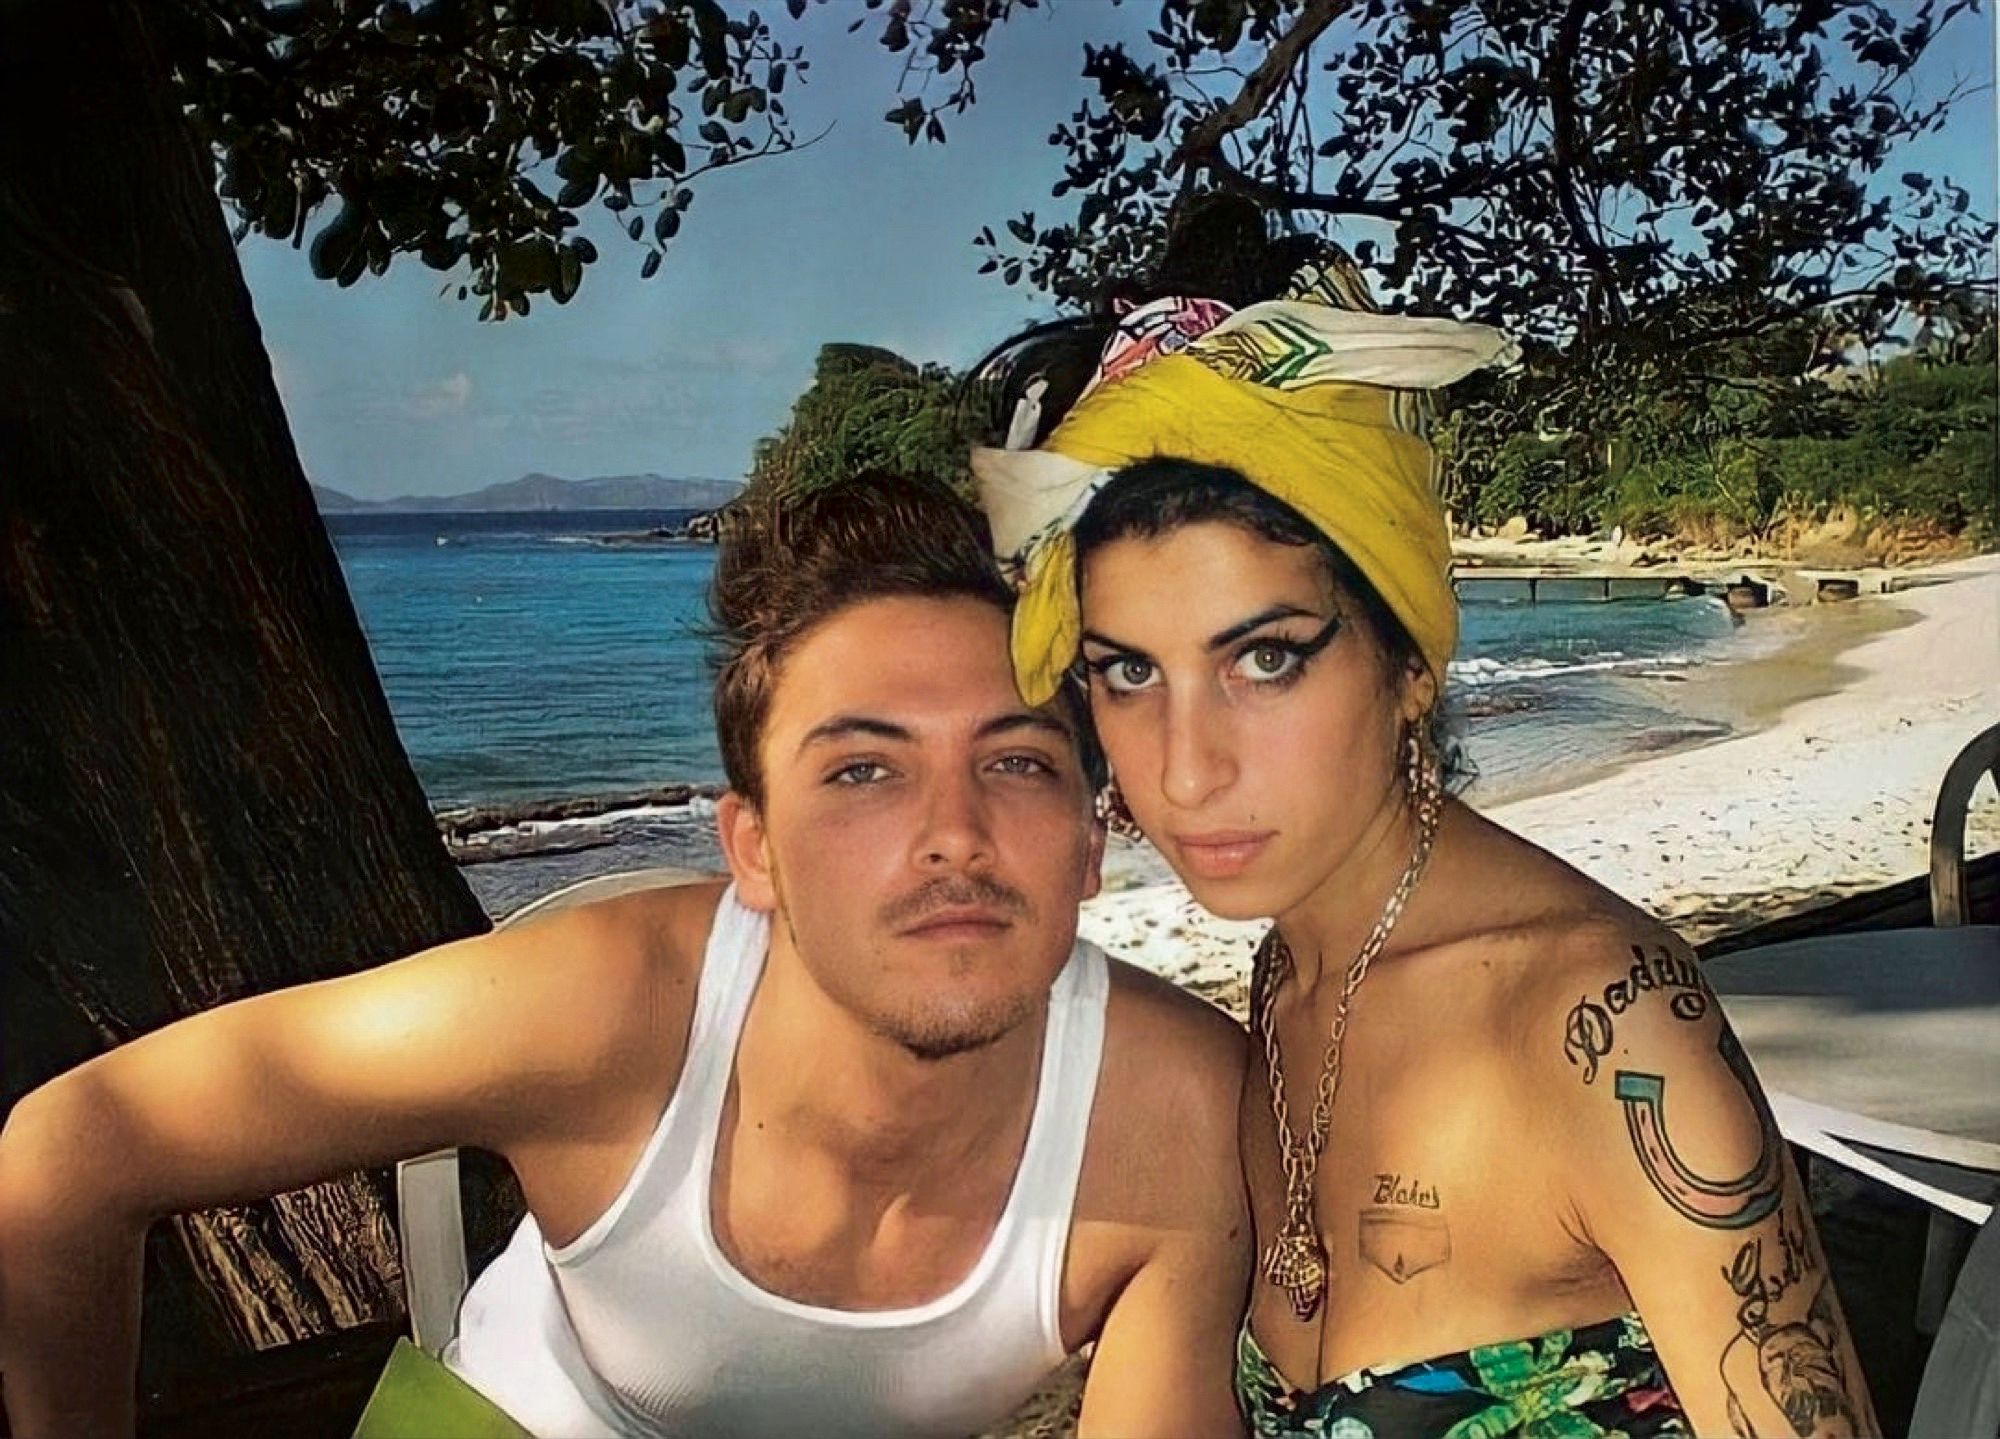 Pictured, Amy Winehouse and Tyler James in Mustique at Basil’s Bar